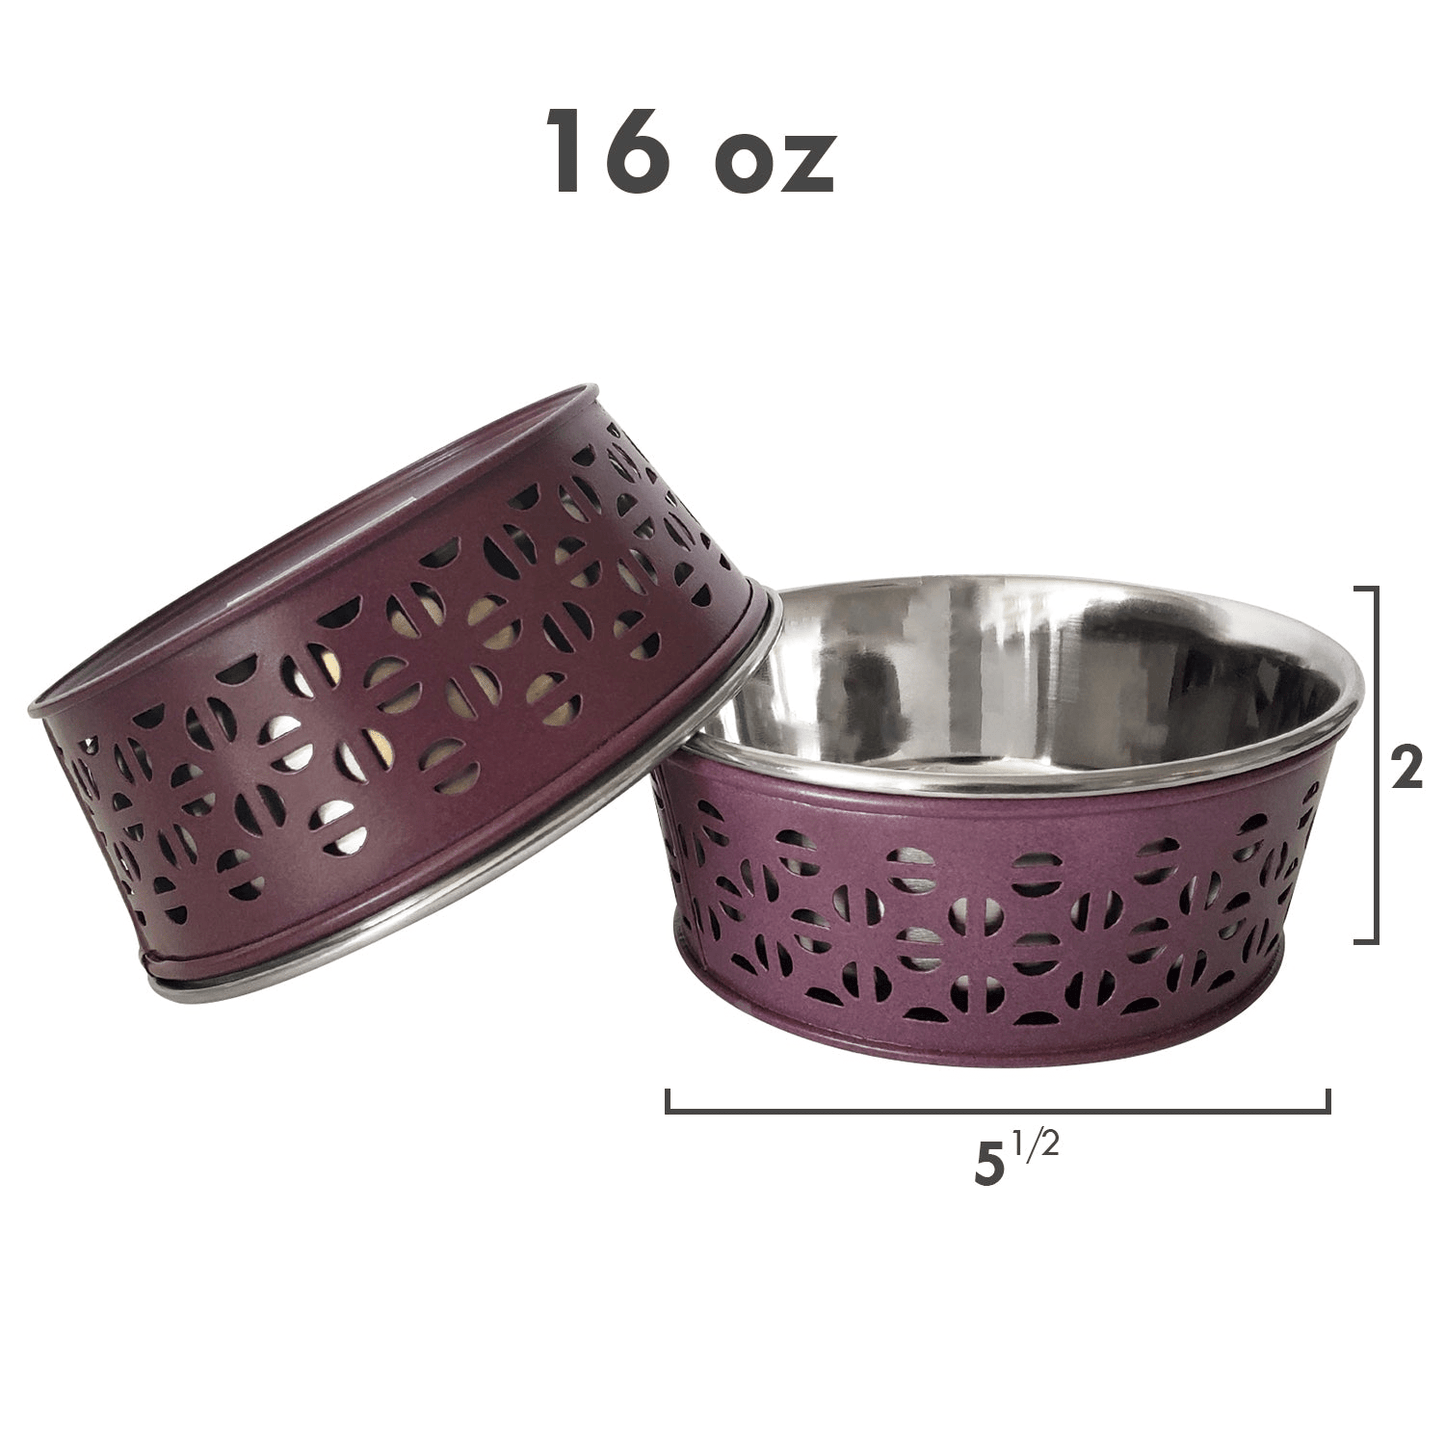 Dog and Pet Stuff Default Stainless Steel Country Farmhouse Dog Bowl, Plum Wine 16 oz